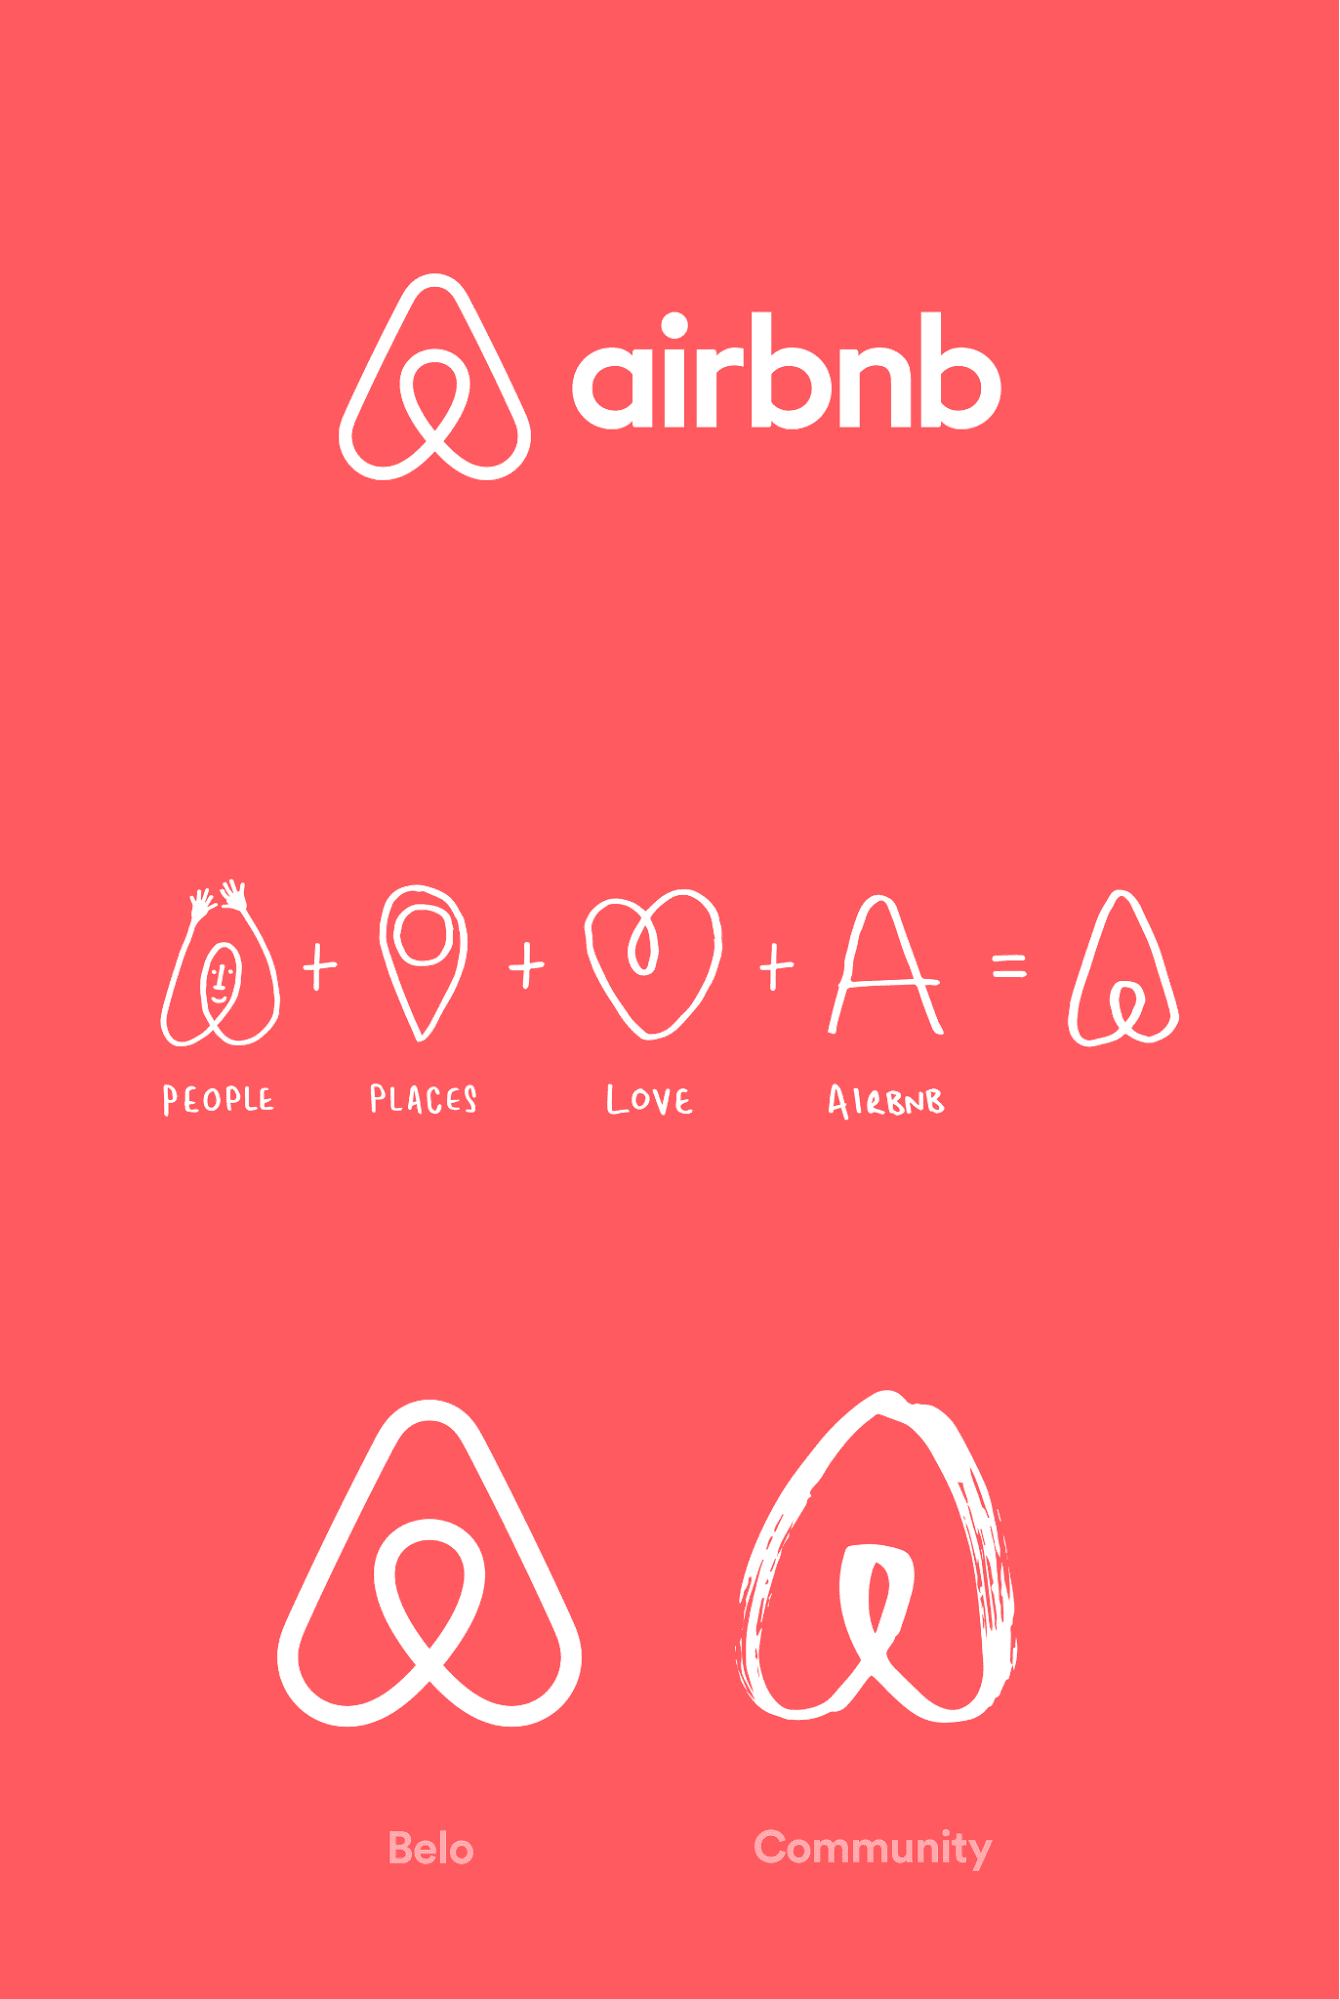 Four visuals of what goes into the new Belo logo; poeple, places, love, and Airbnb.